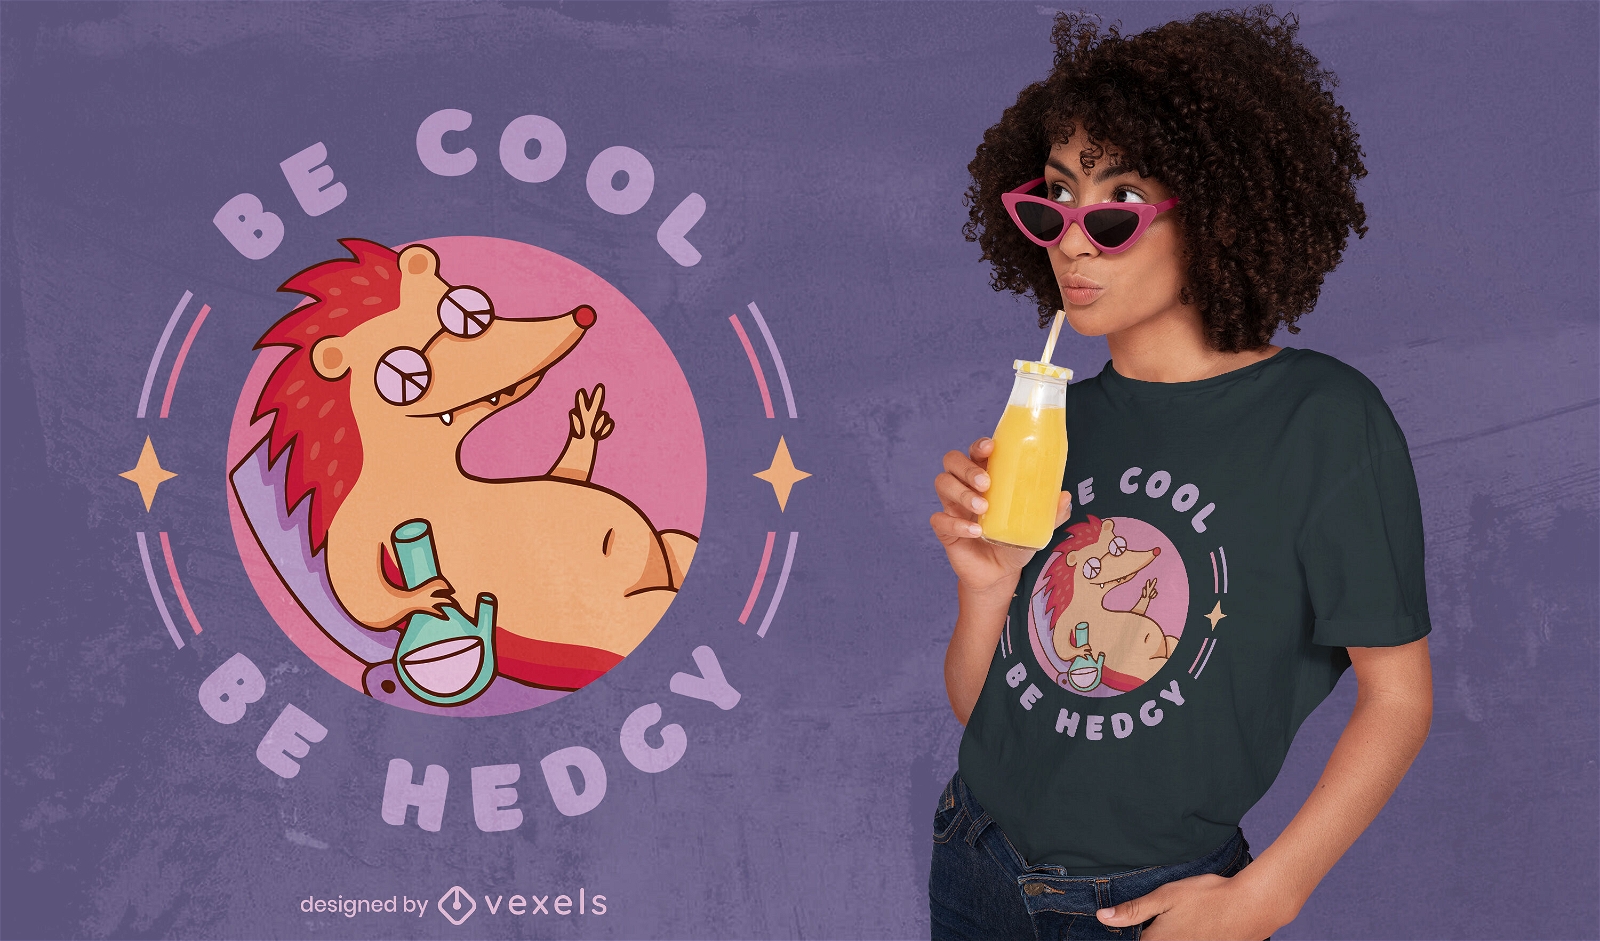 Bee cool be hedgy quote dise?o de camiseta